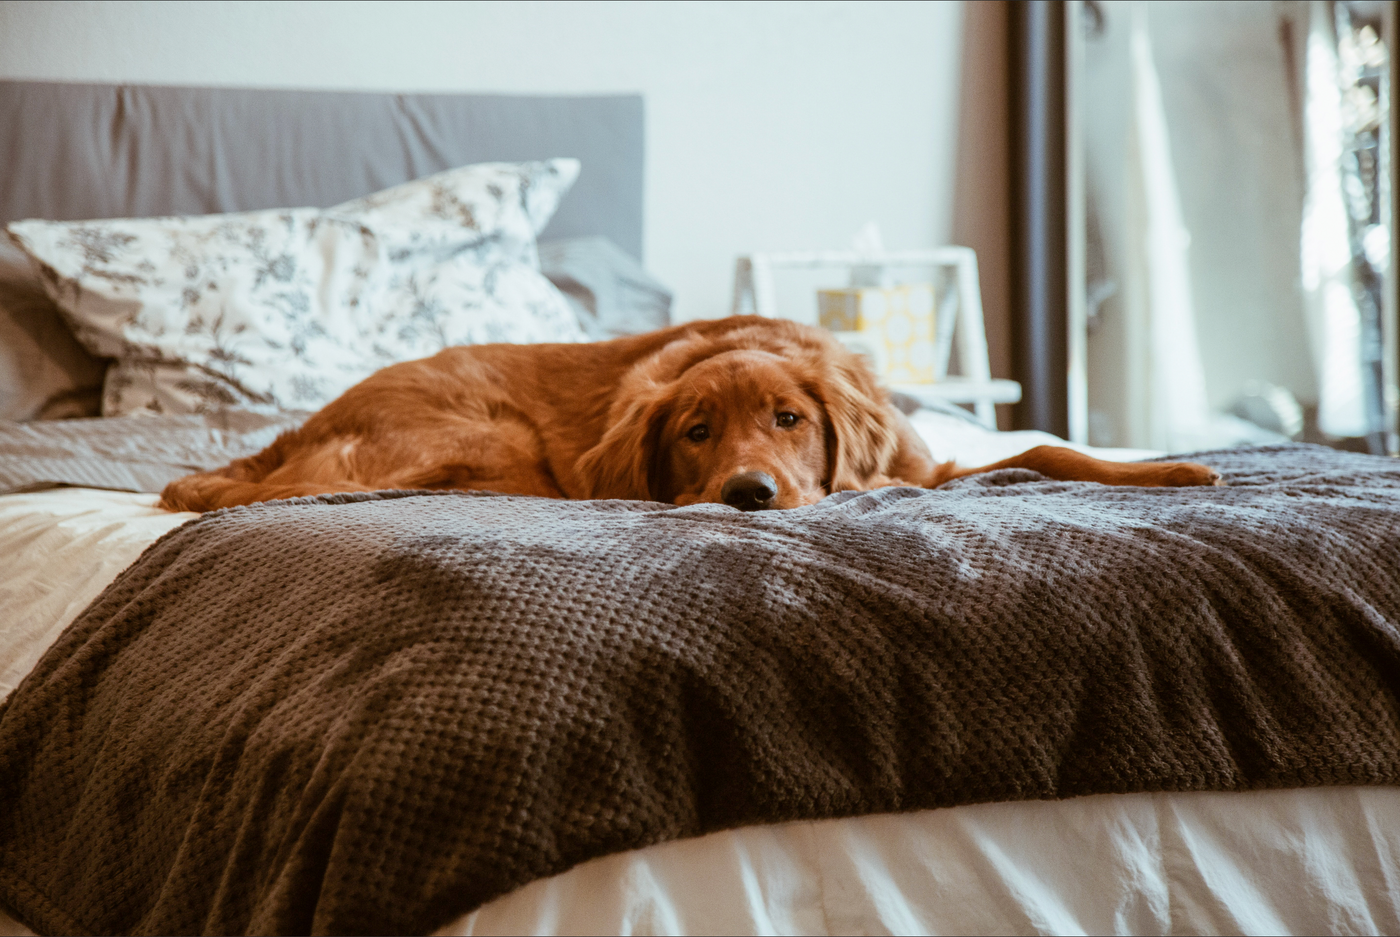 should you let your dog on the bed?